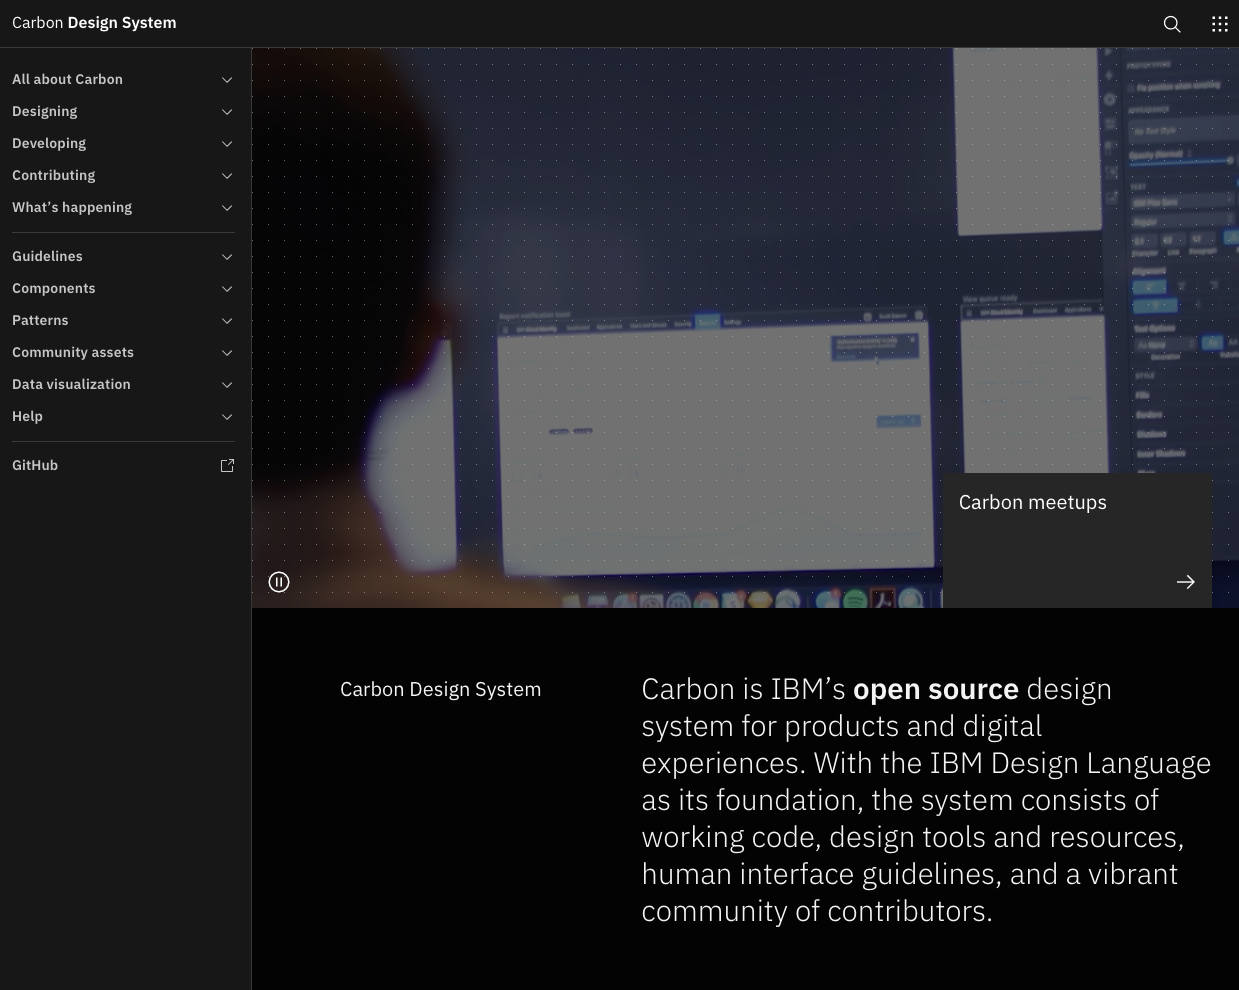 IBM named their design system Carbon and here is its website screenshot